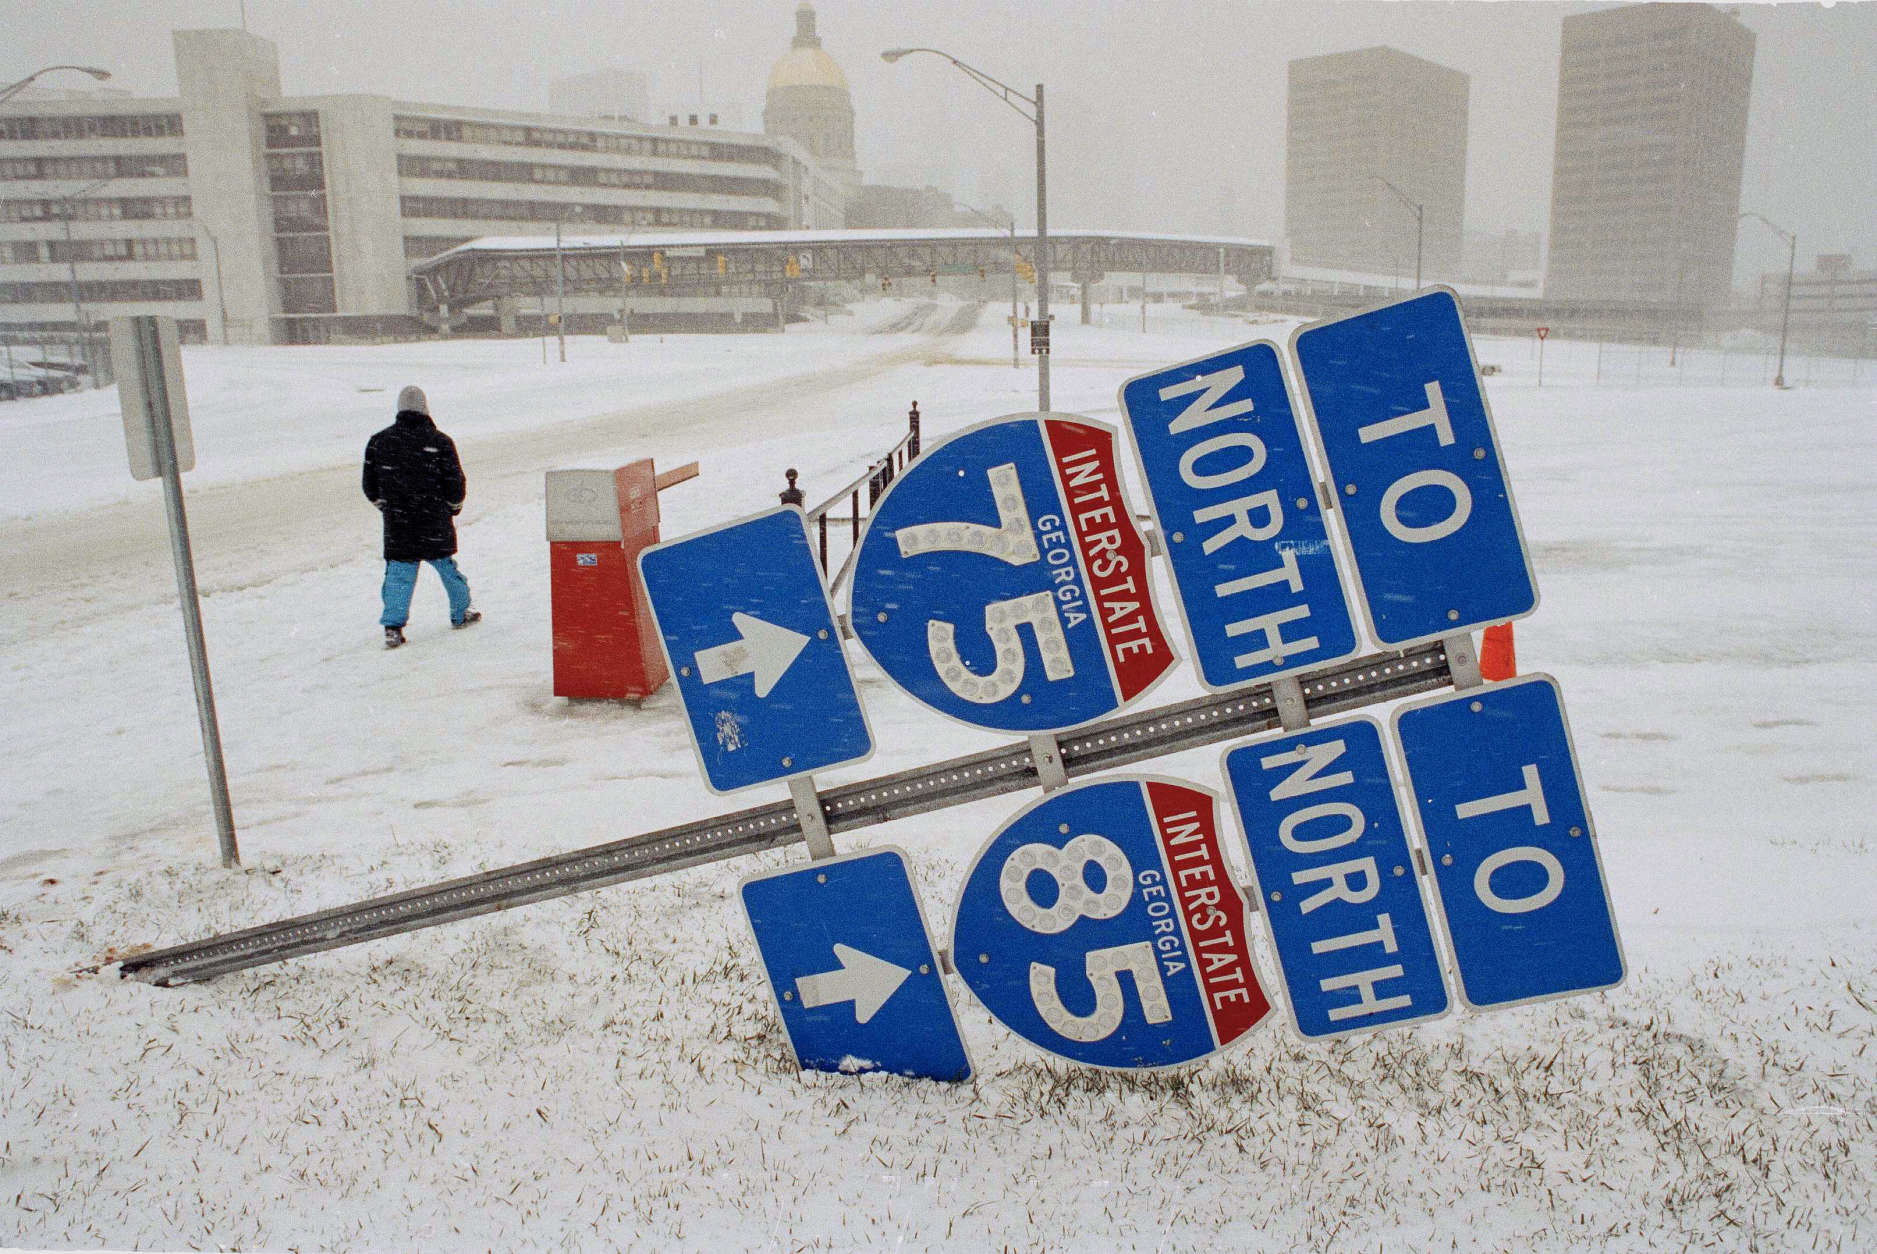 A pedestrian walks through the snow March 13, 1993, in Atlanta. Interstate signs were knocked down by the windy conditions. That snowstorm, which dumped 13.9 inches of snow at Dulles International Airport, enveloped the eastern third of the country. (AP Photo/Curtis Compton)